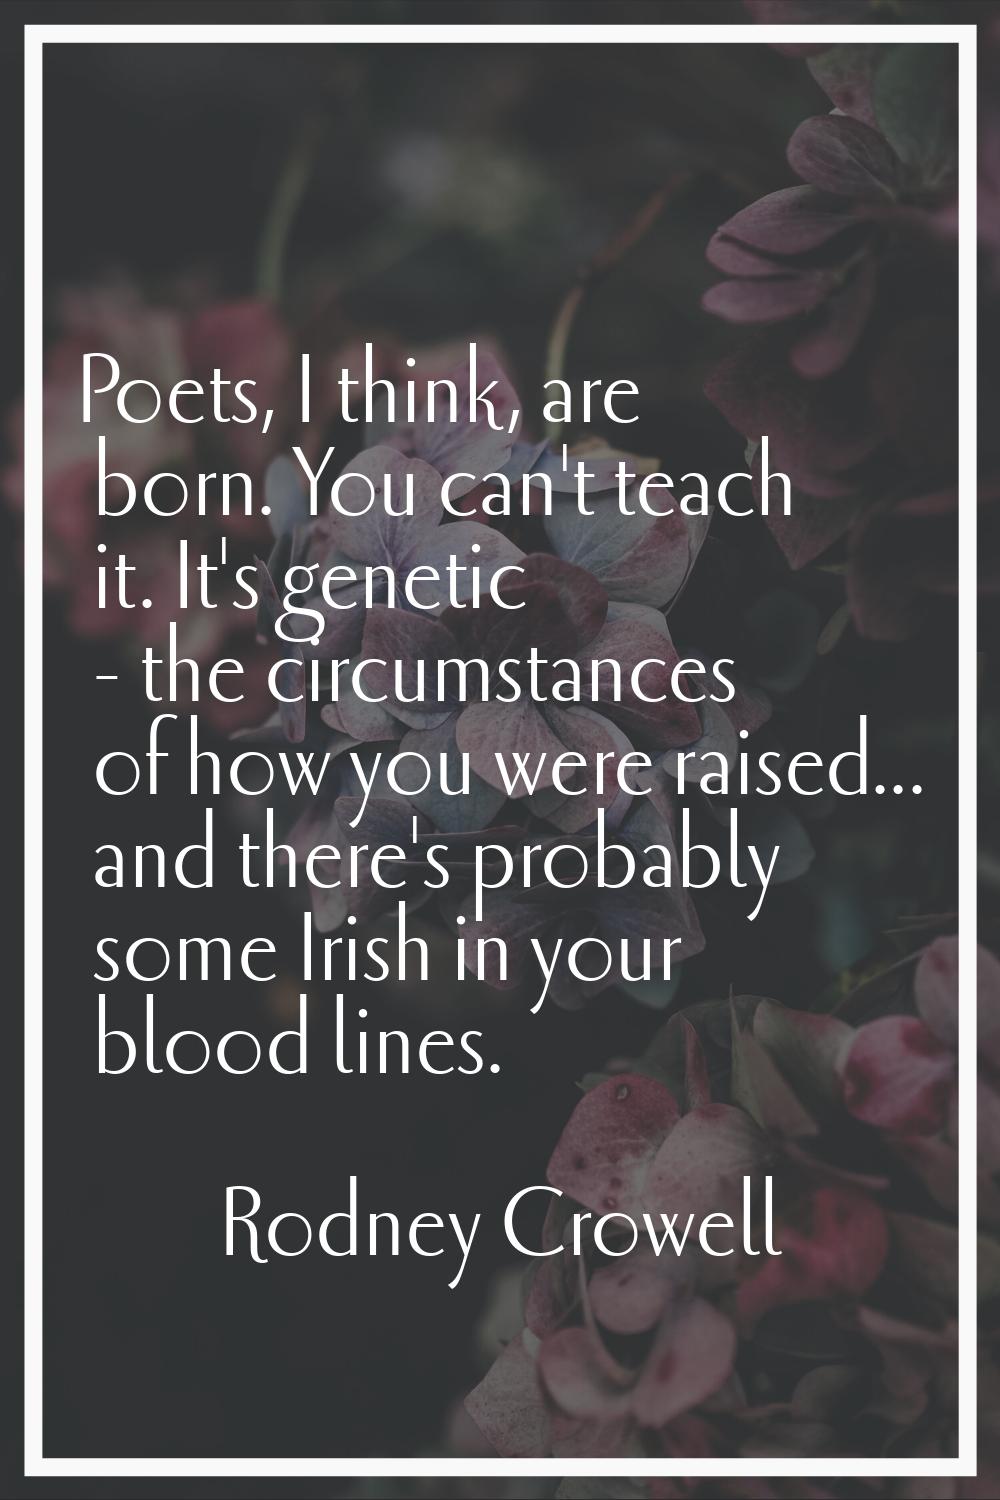 Poets, I think, are born. You can't teach it. It's genetic - the circumstances of how you were rais